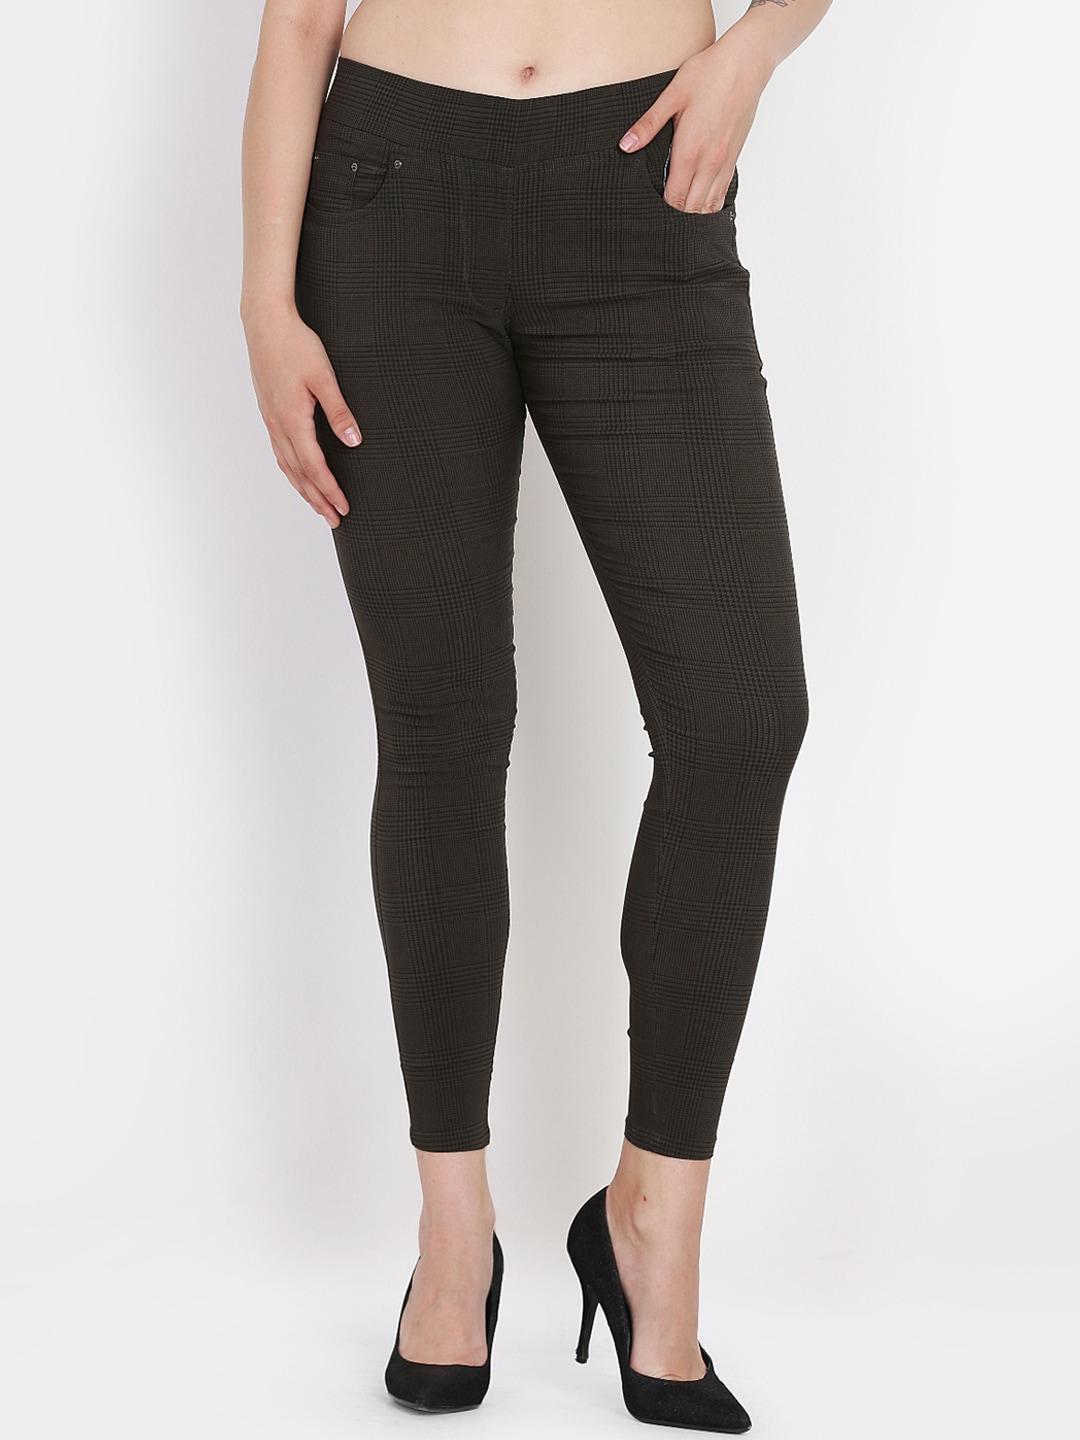 westwood-women-green-checked-jeggings